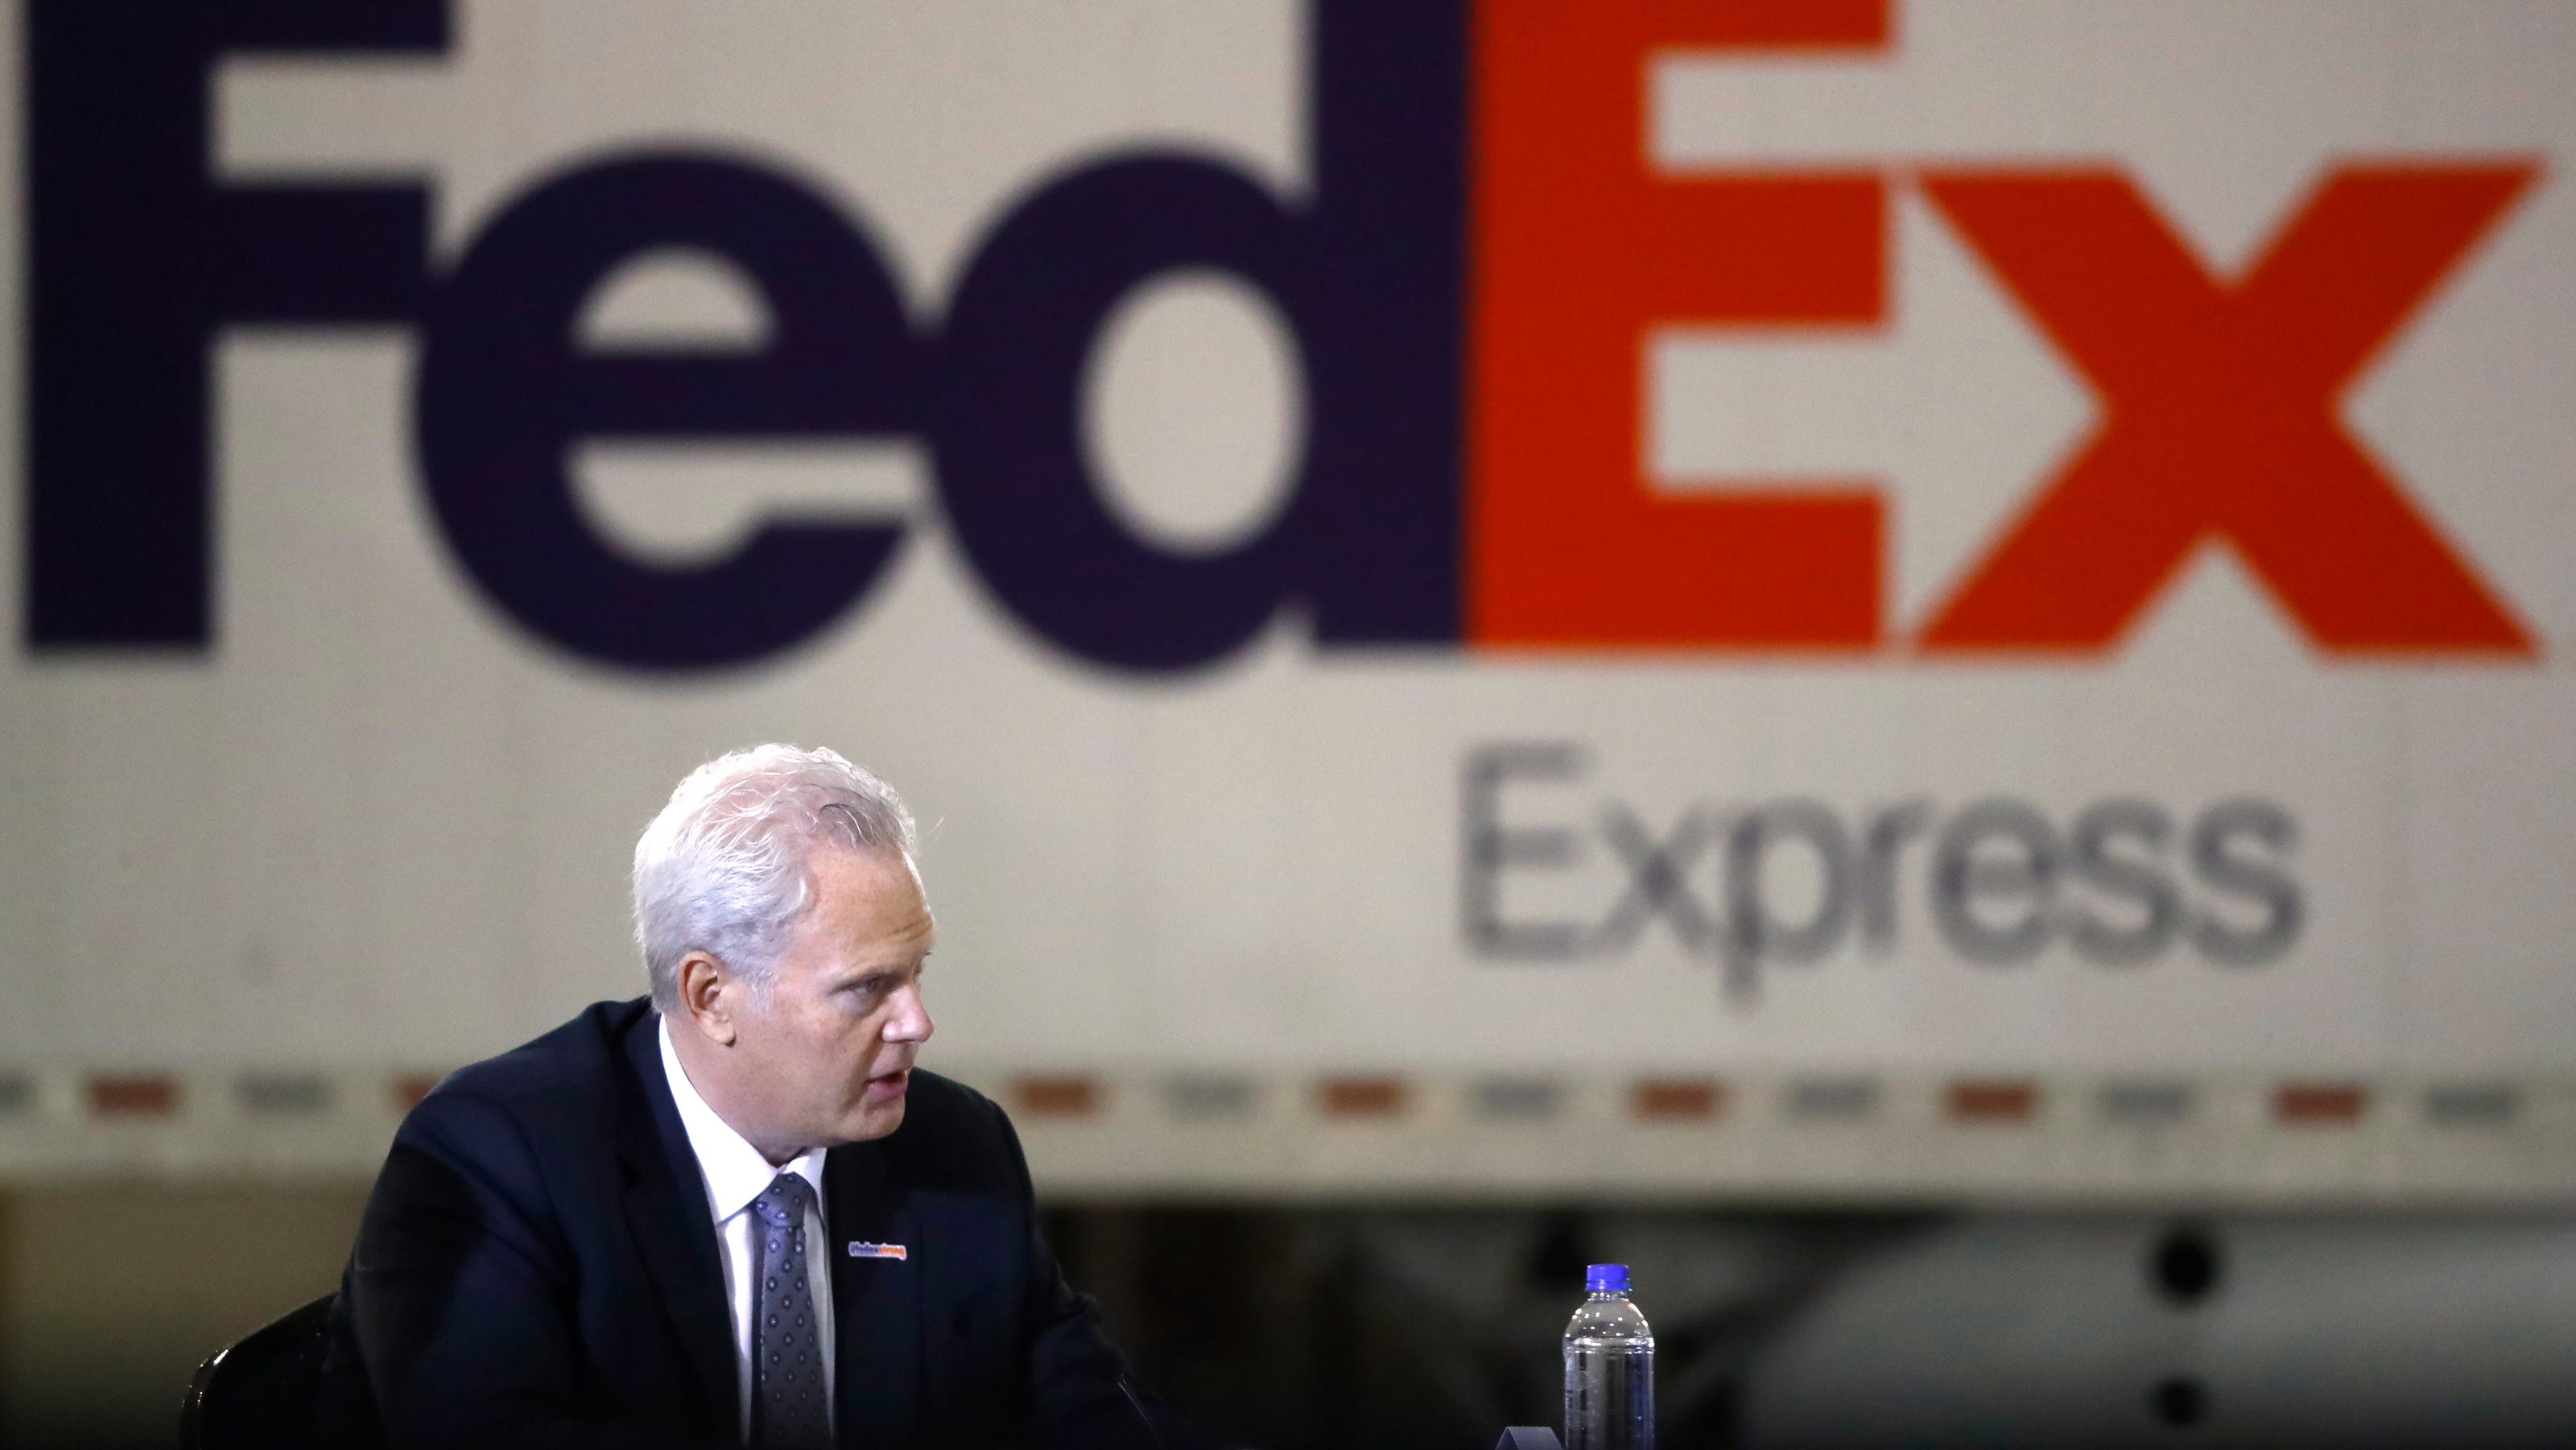 FedEx shipping delays Executive urges customer patience